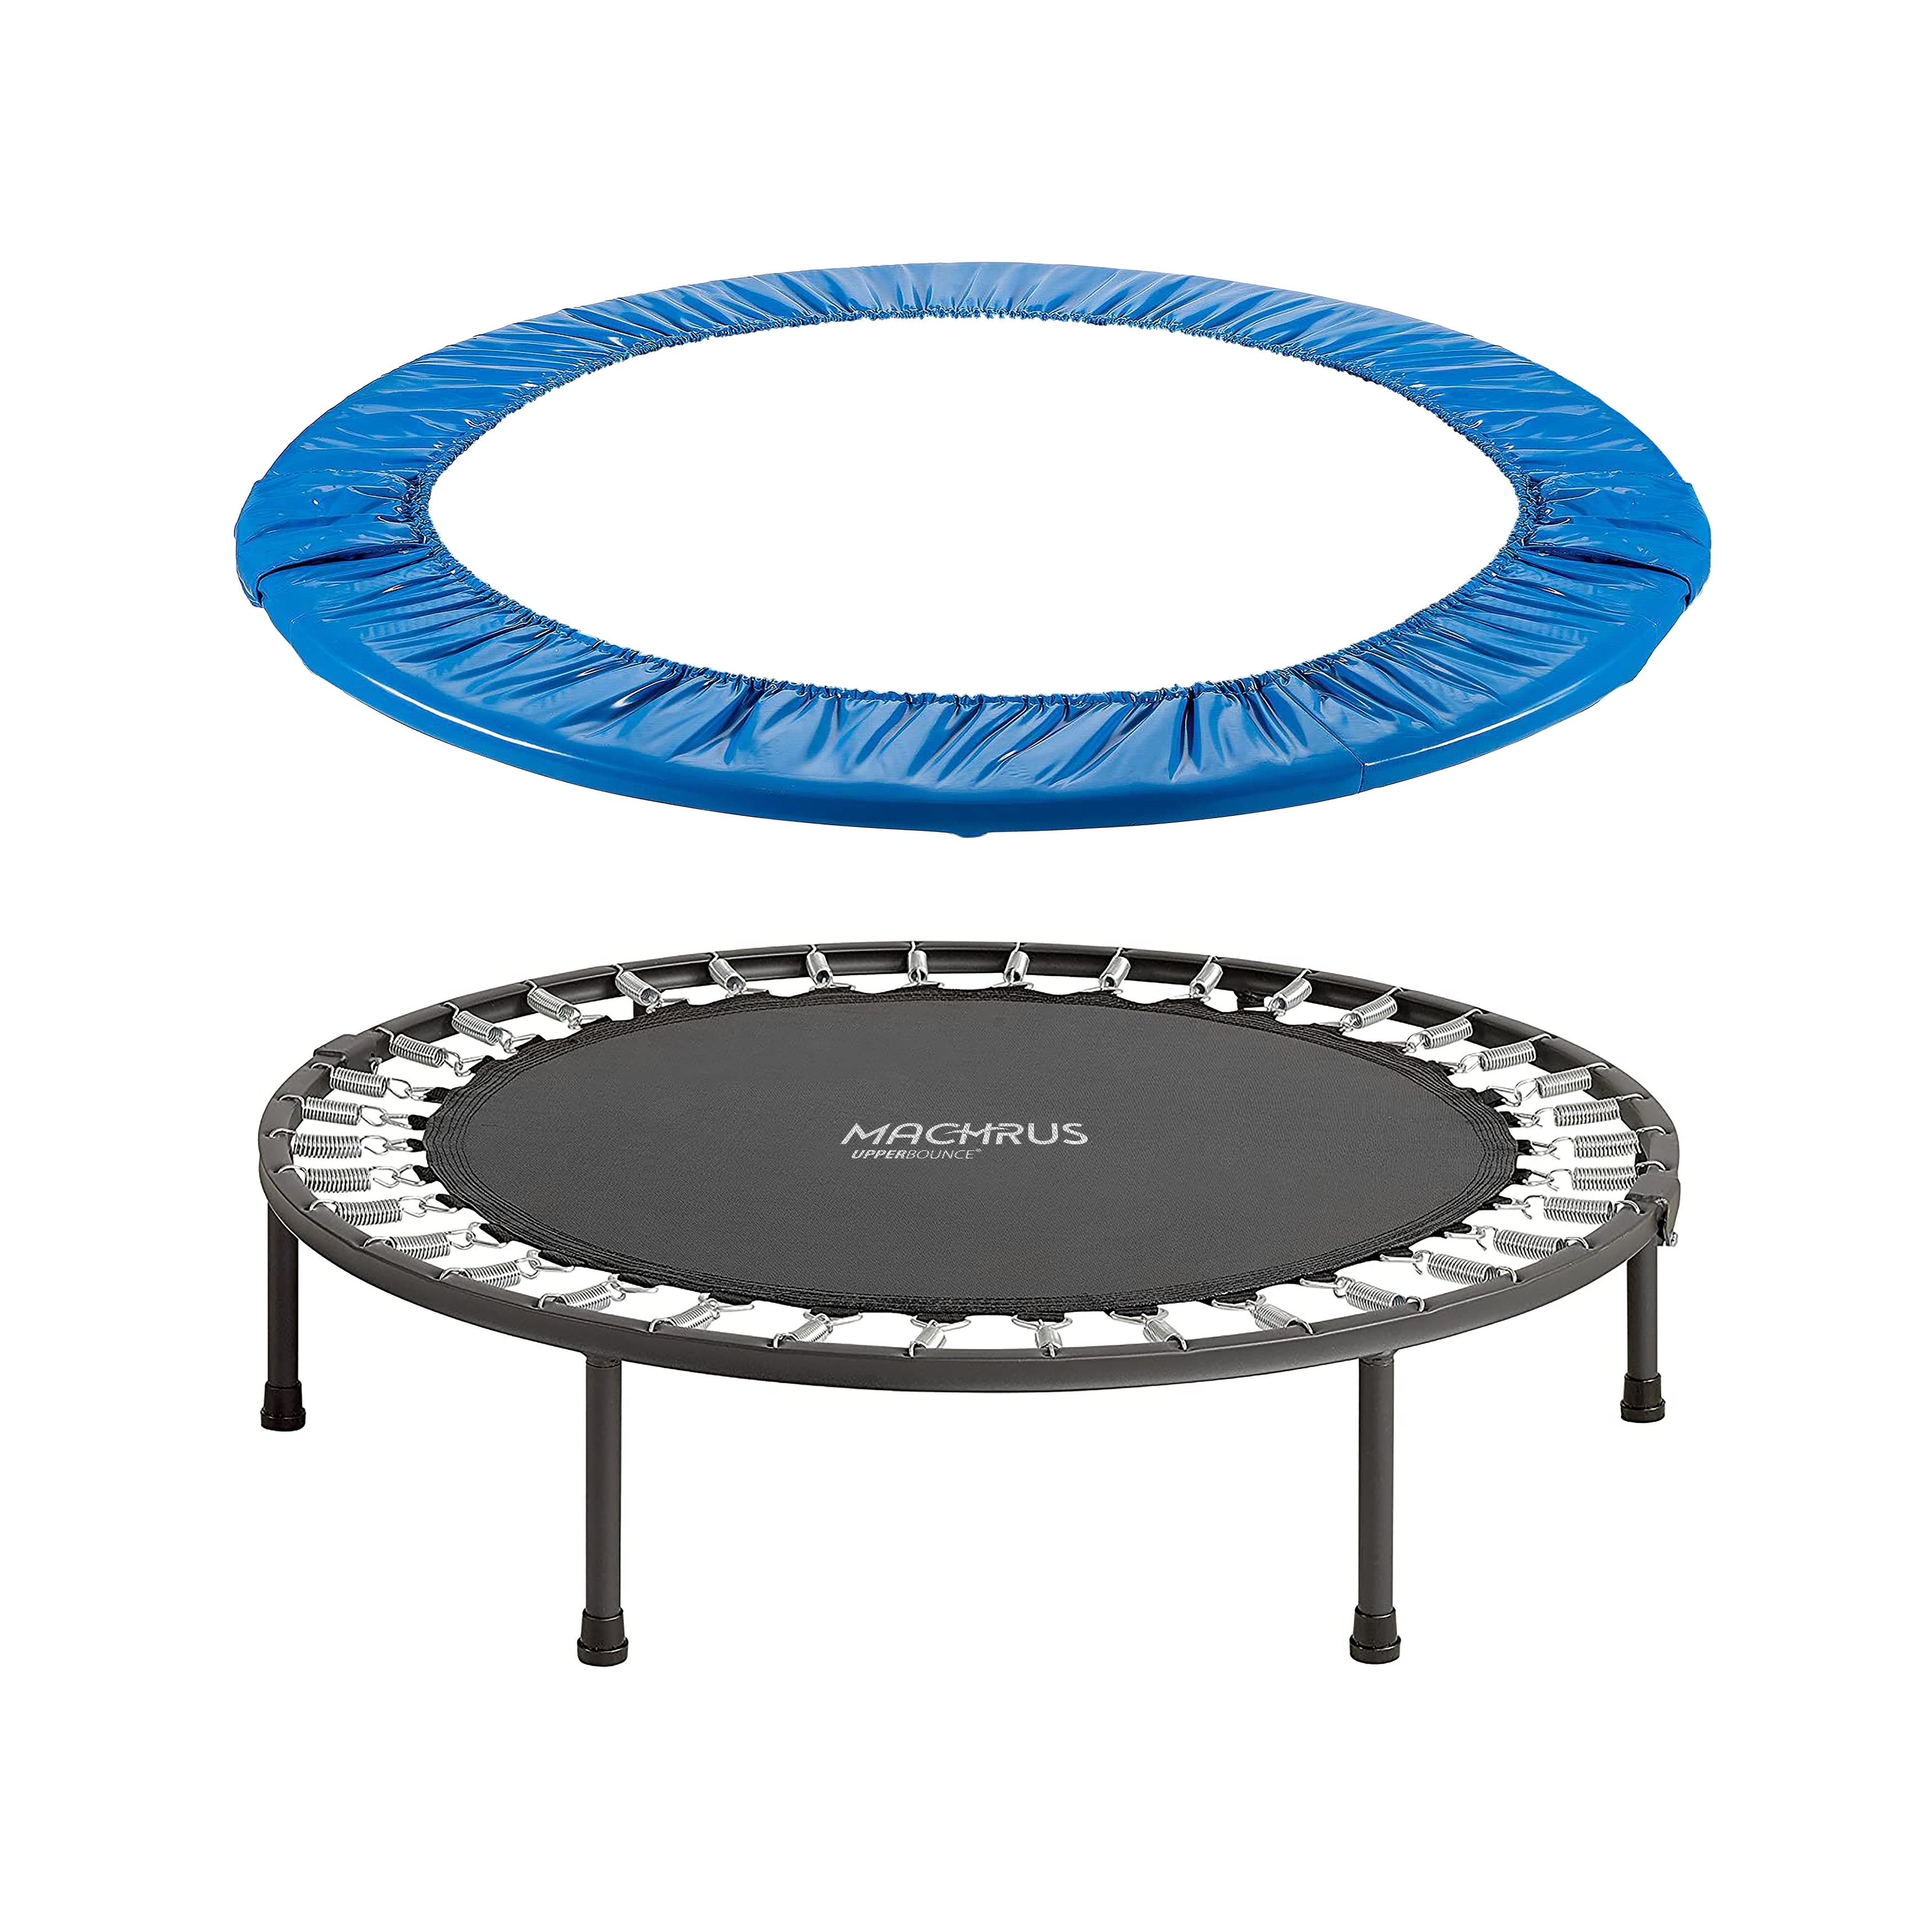 https://ak1.ostkcdn.com/images/products/is/images/direct/ee21ec09cfa2cc3cab58a450be47f6cbc96339a8/Upper-Bounce-Round-Folding-Trampoline-Safety-Pad-for-Mini-Rebounder-36%22%2C-40%22%2C-44%22%2C-48%22.jpg